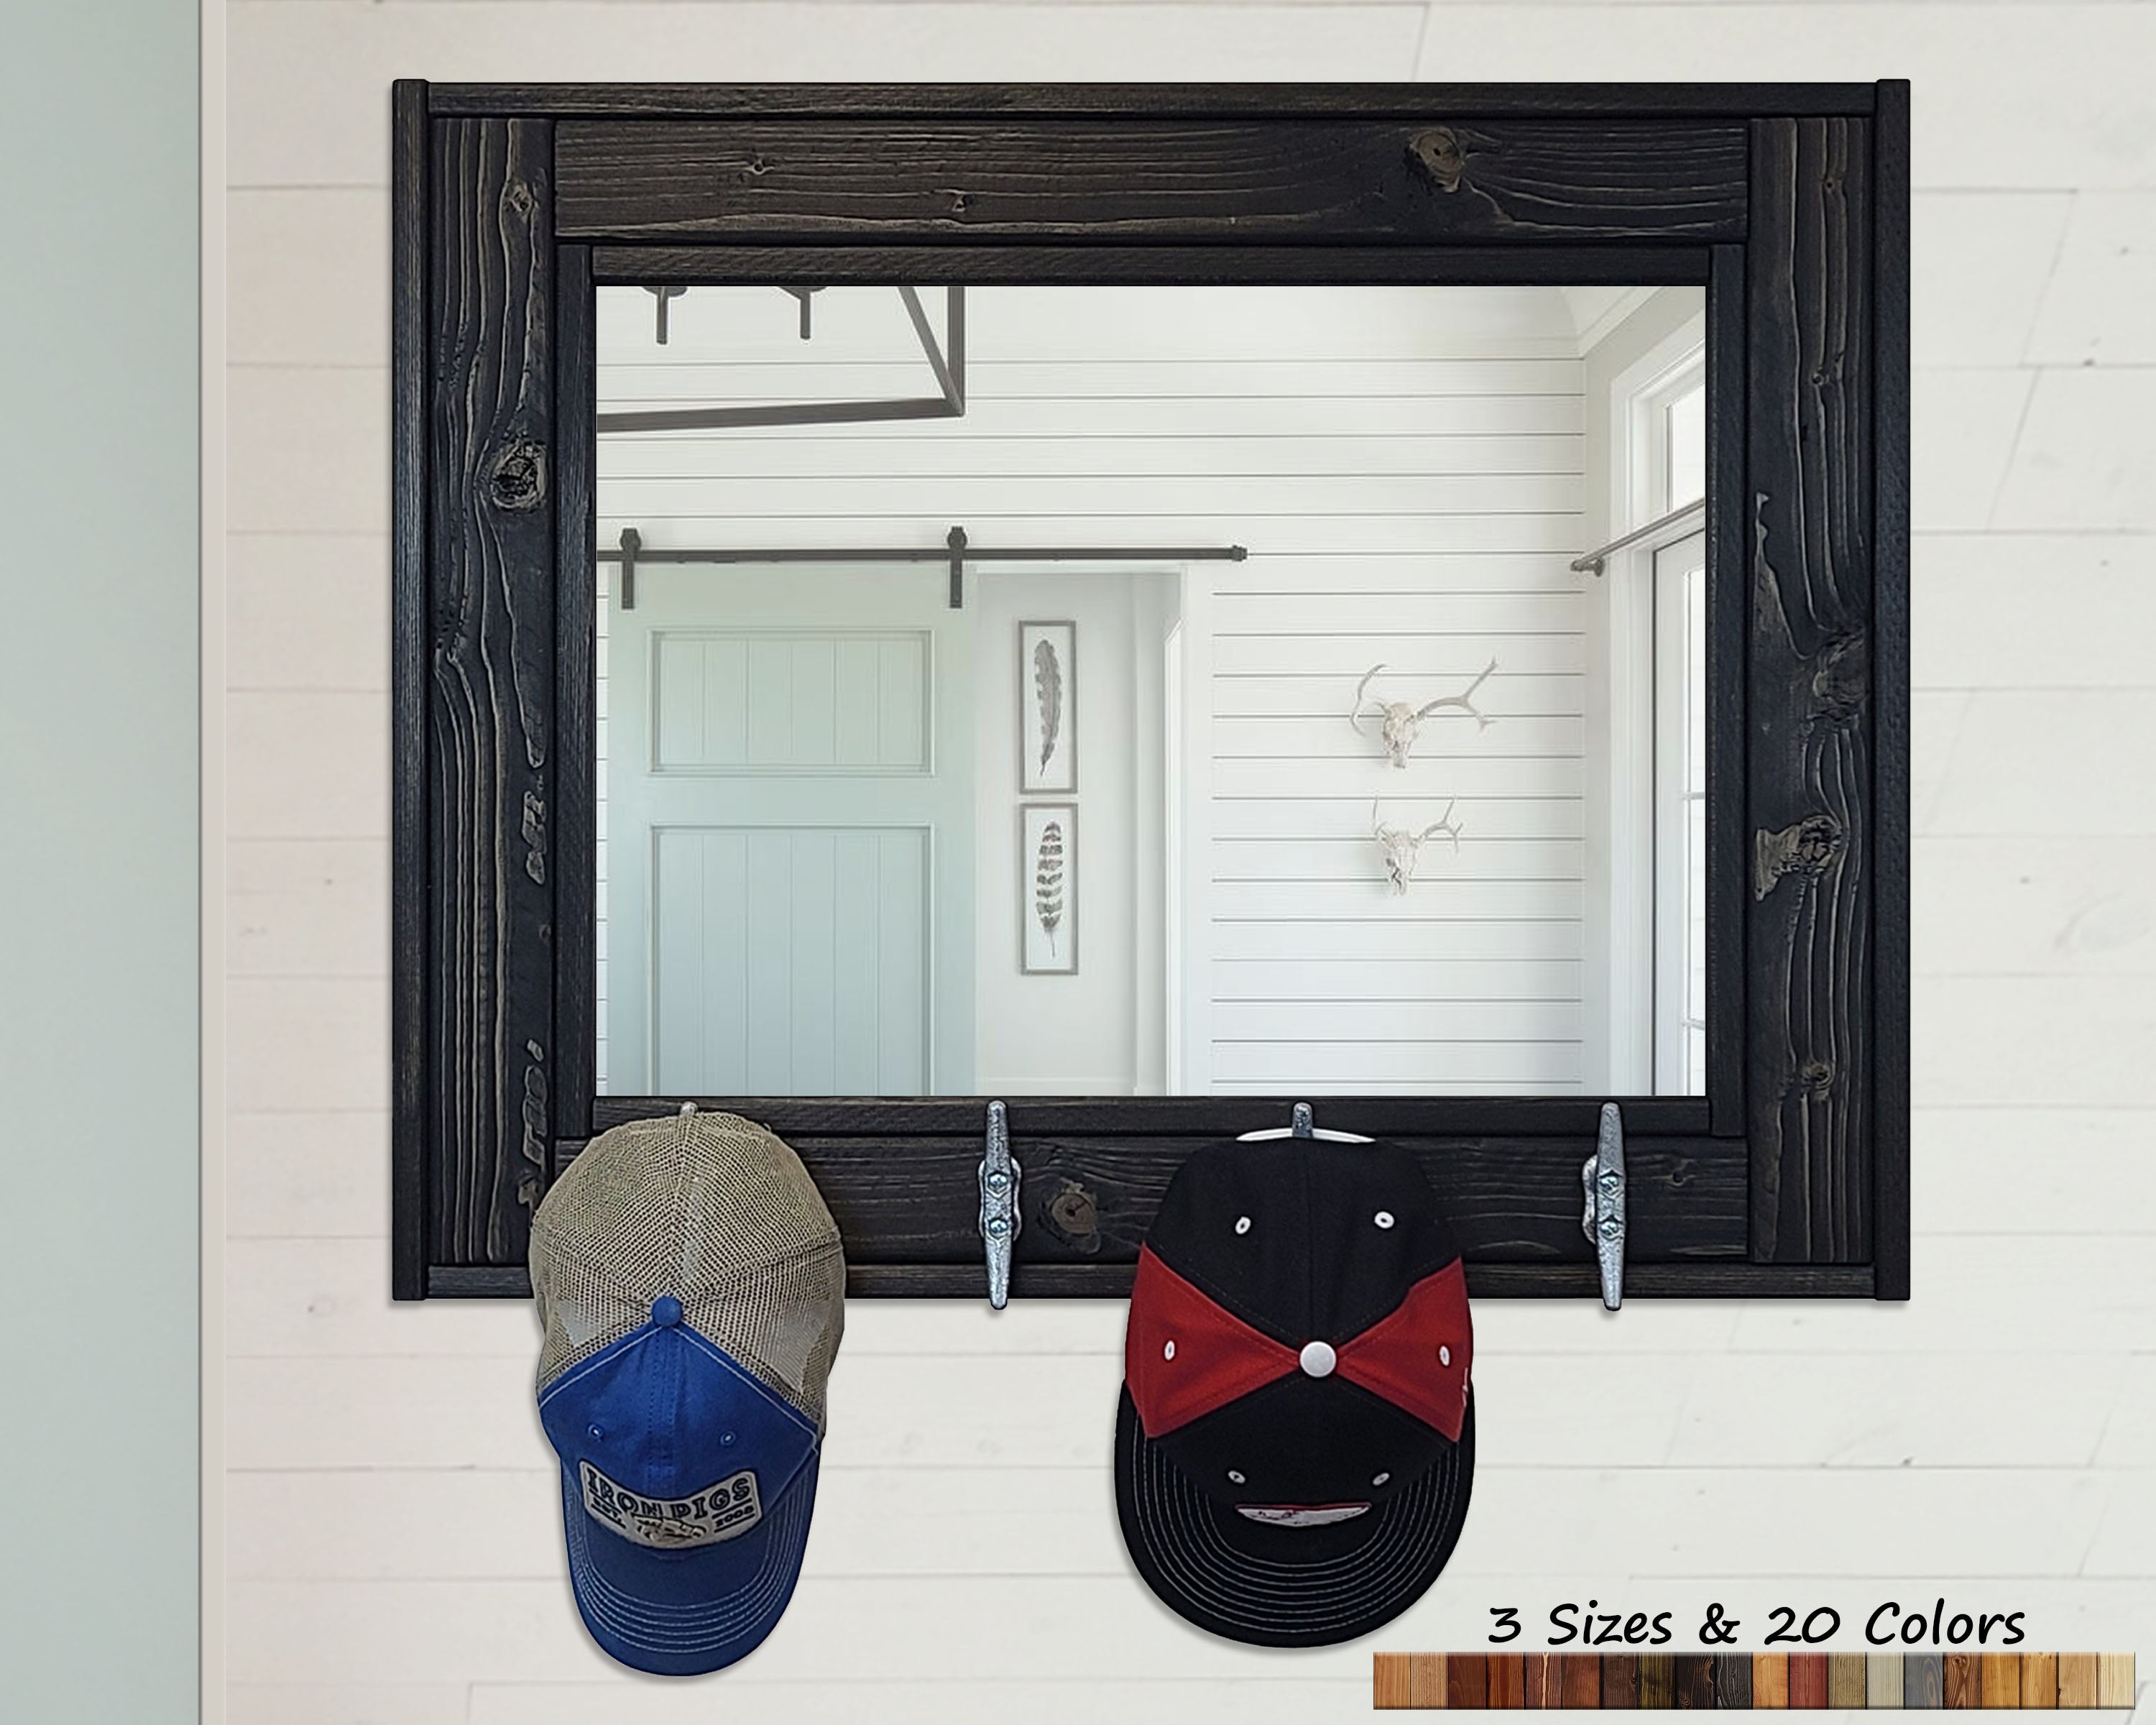 Boat House Row Mirror with Boat Cleats, 20 Stain Colors, Lane of Lenore